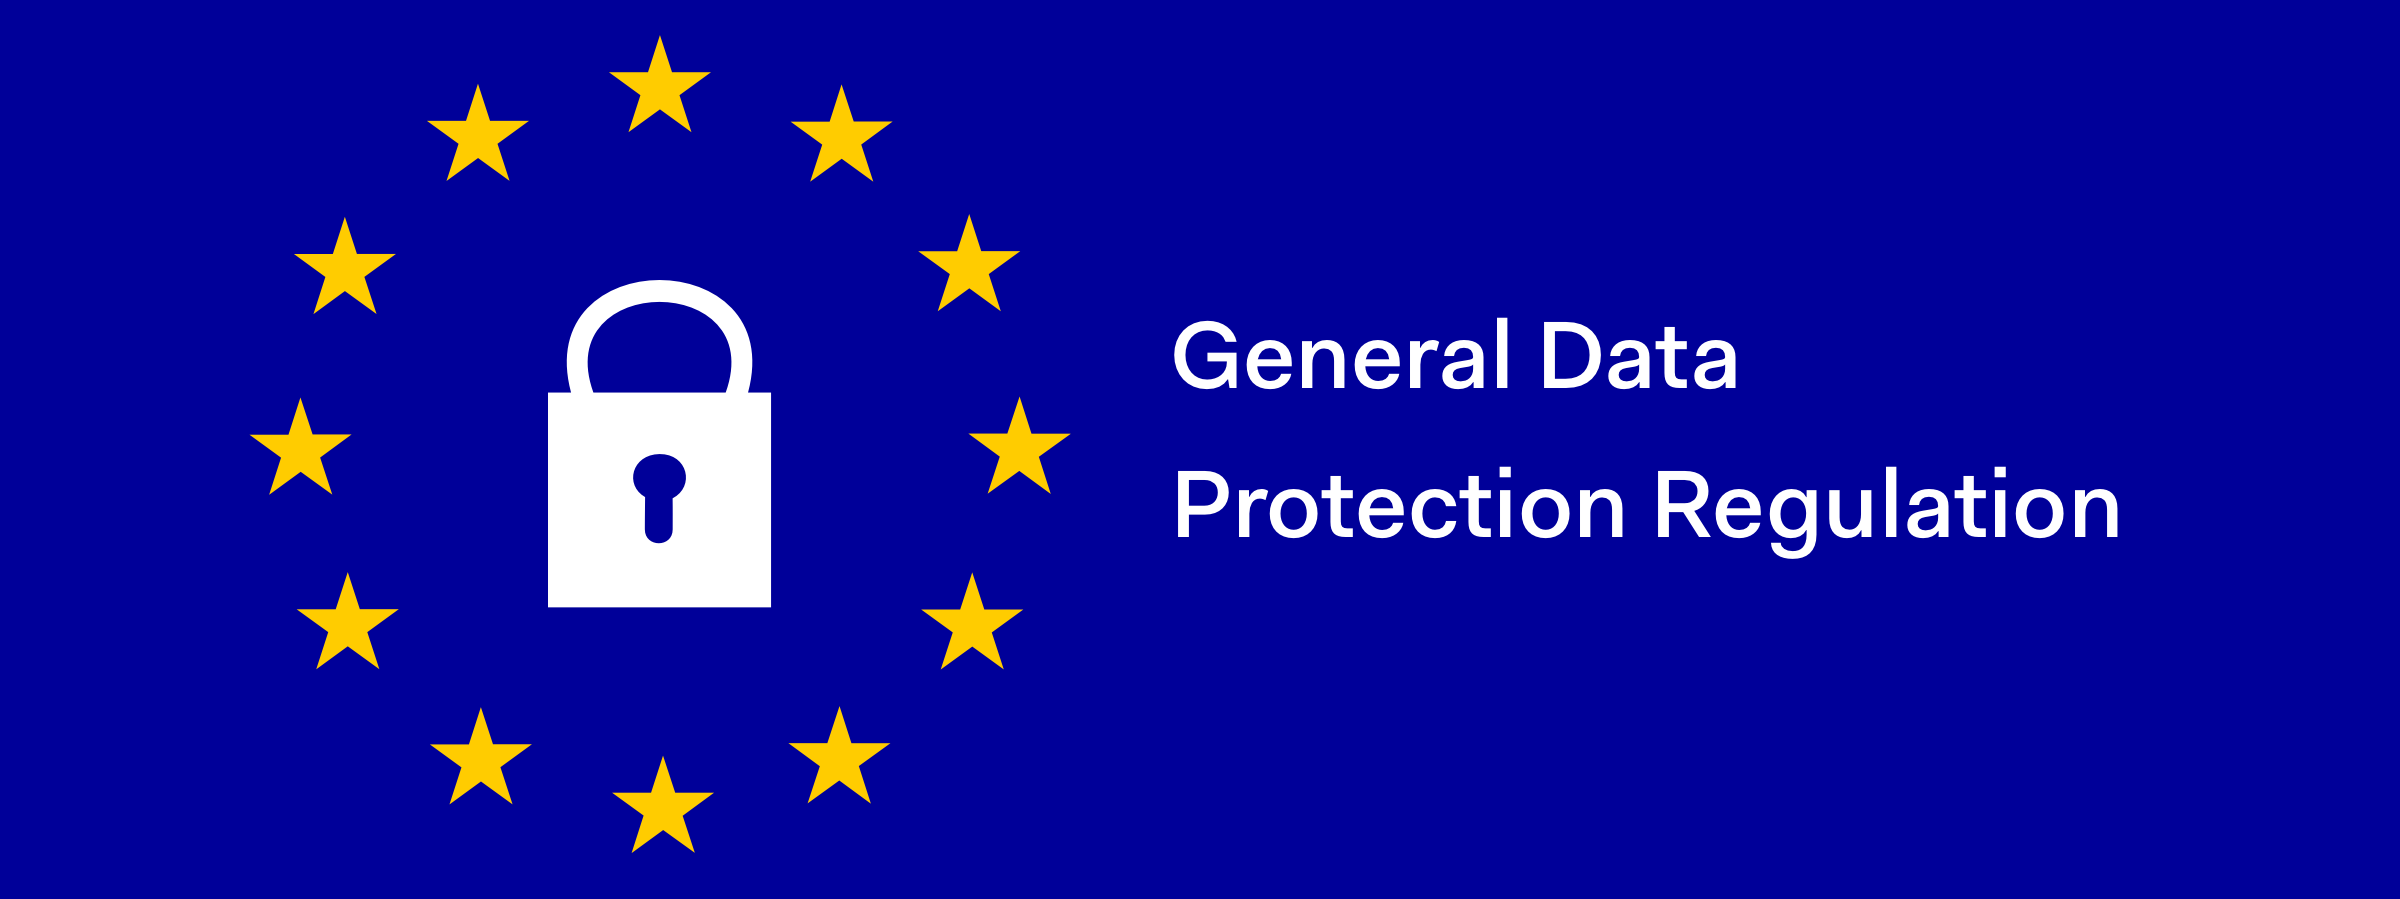 GDPR What You Need to Know